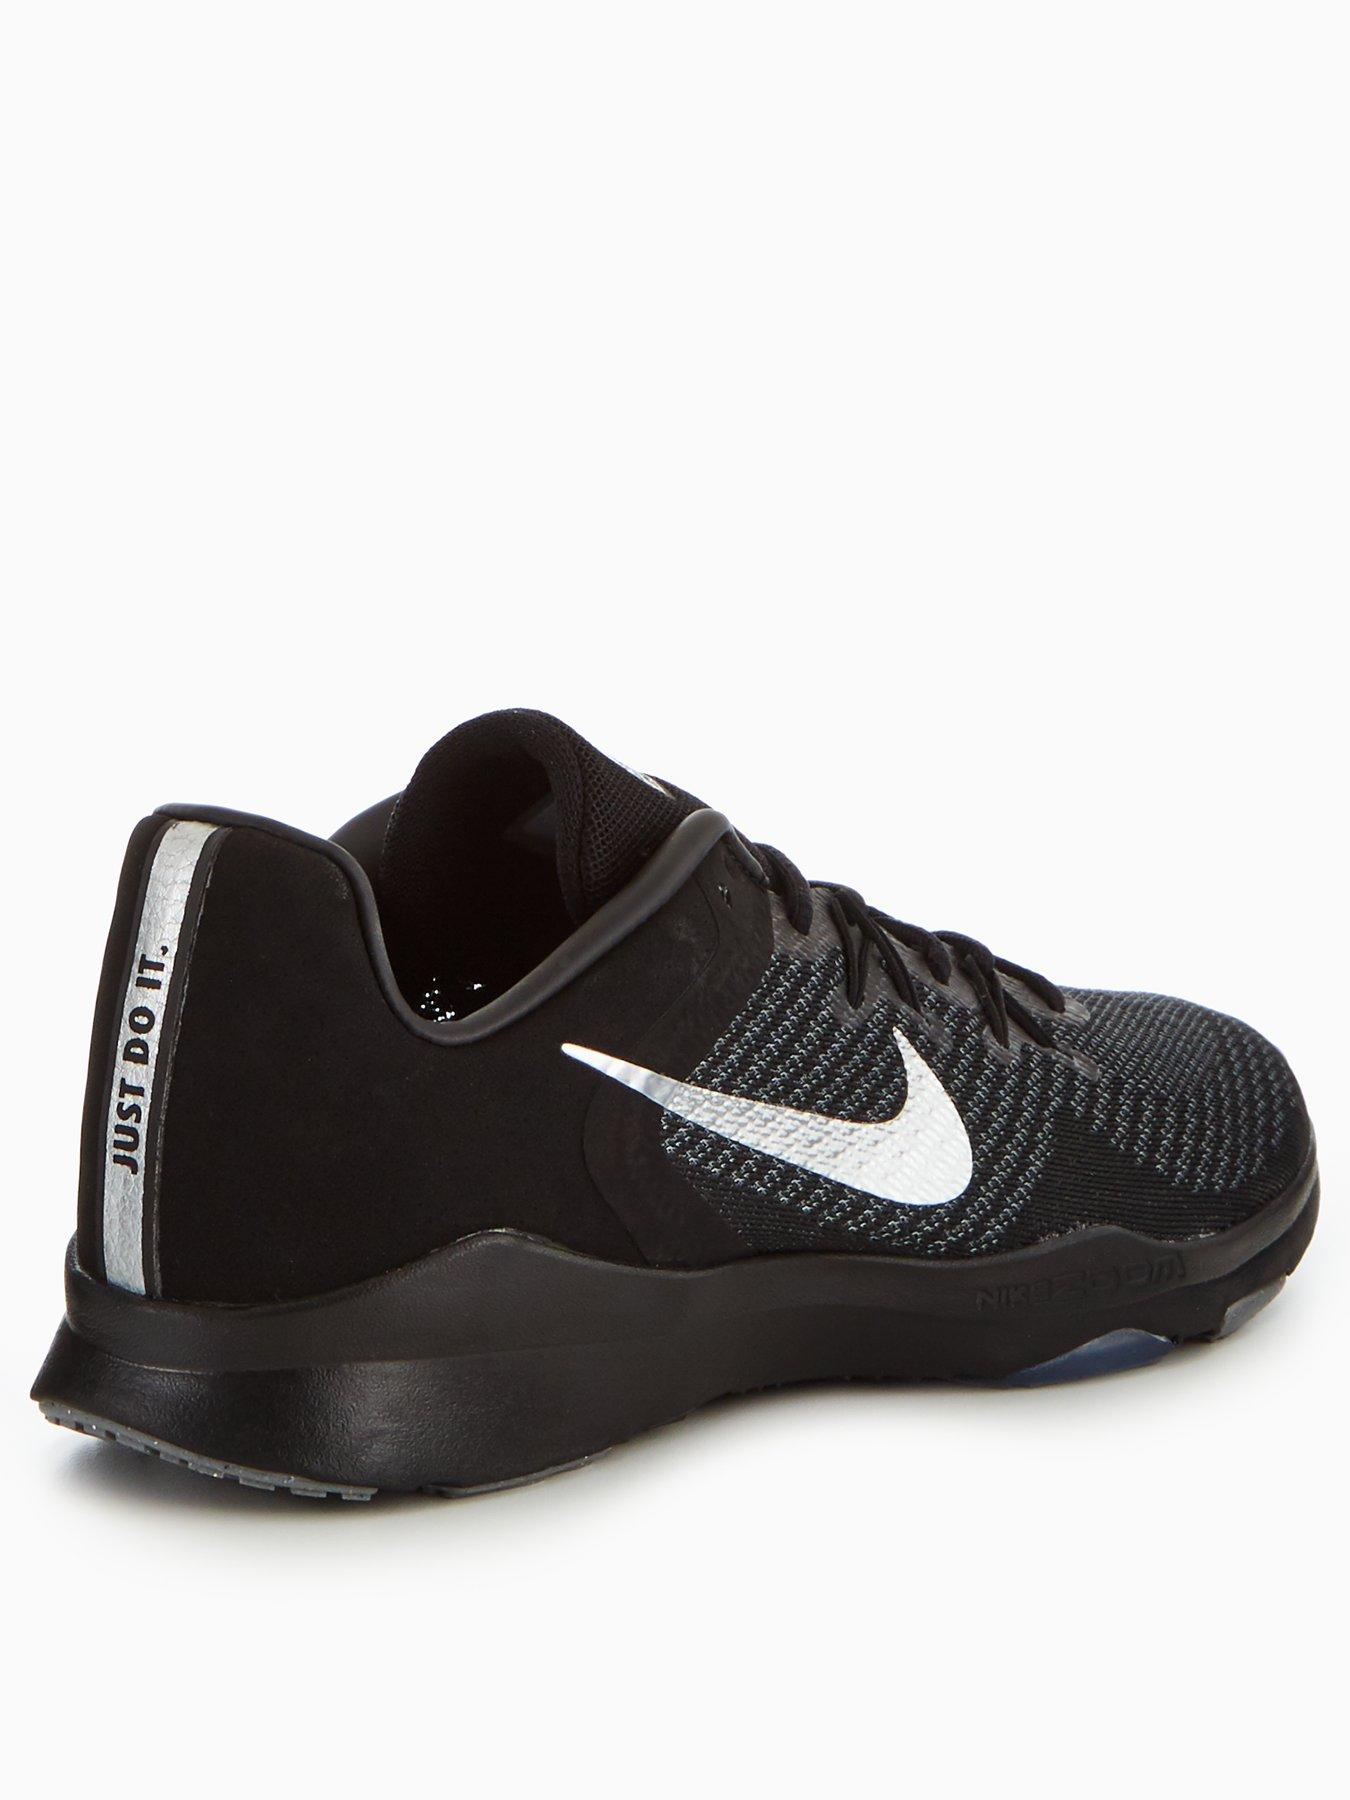 nike zoom condition tr 2 review